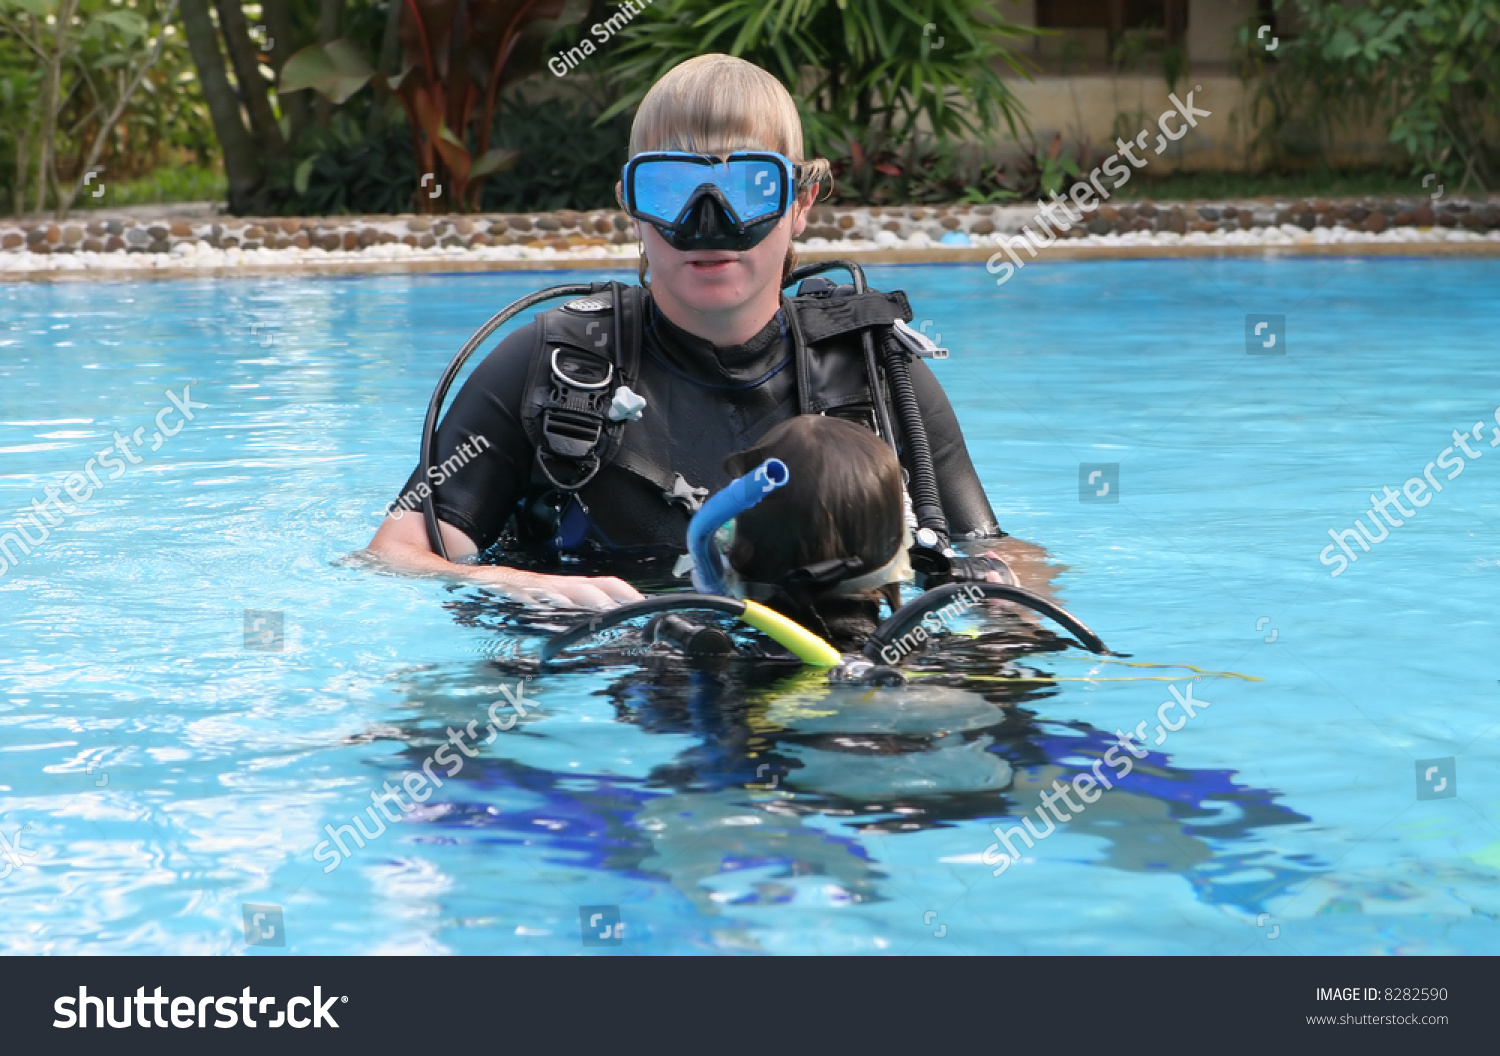 Scuba diving instructor demonstrates a skill to a student in a swimming pool. #8282590